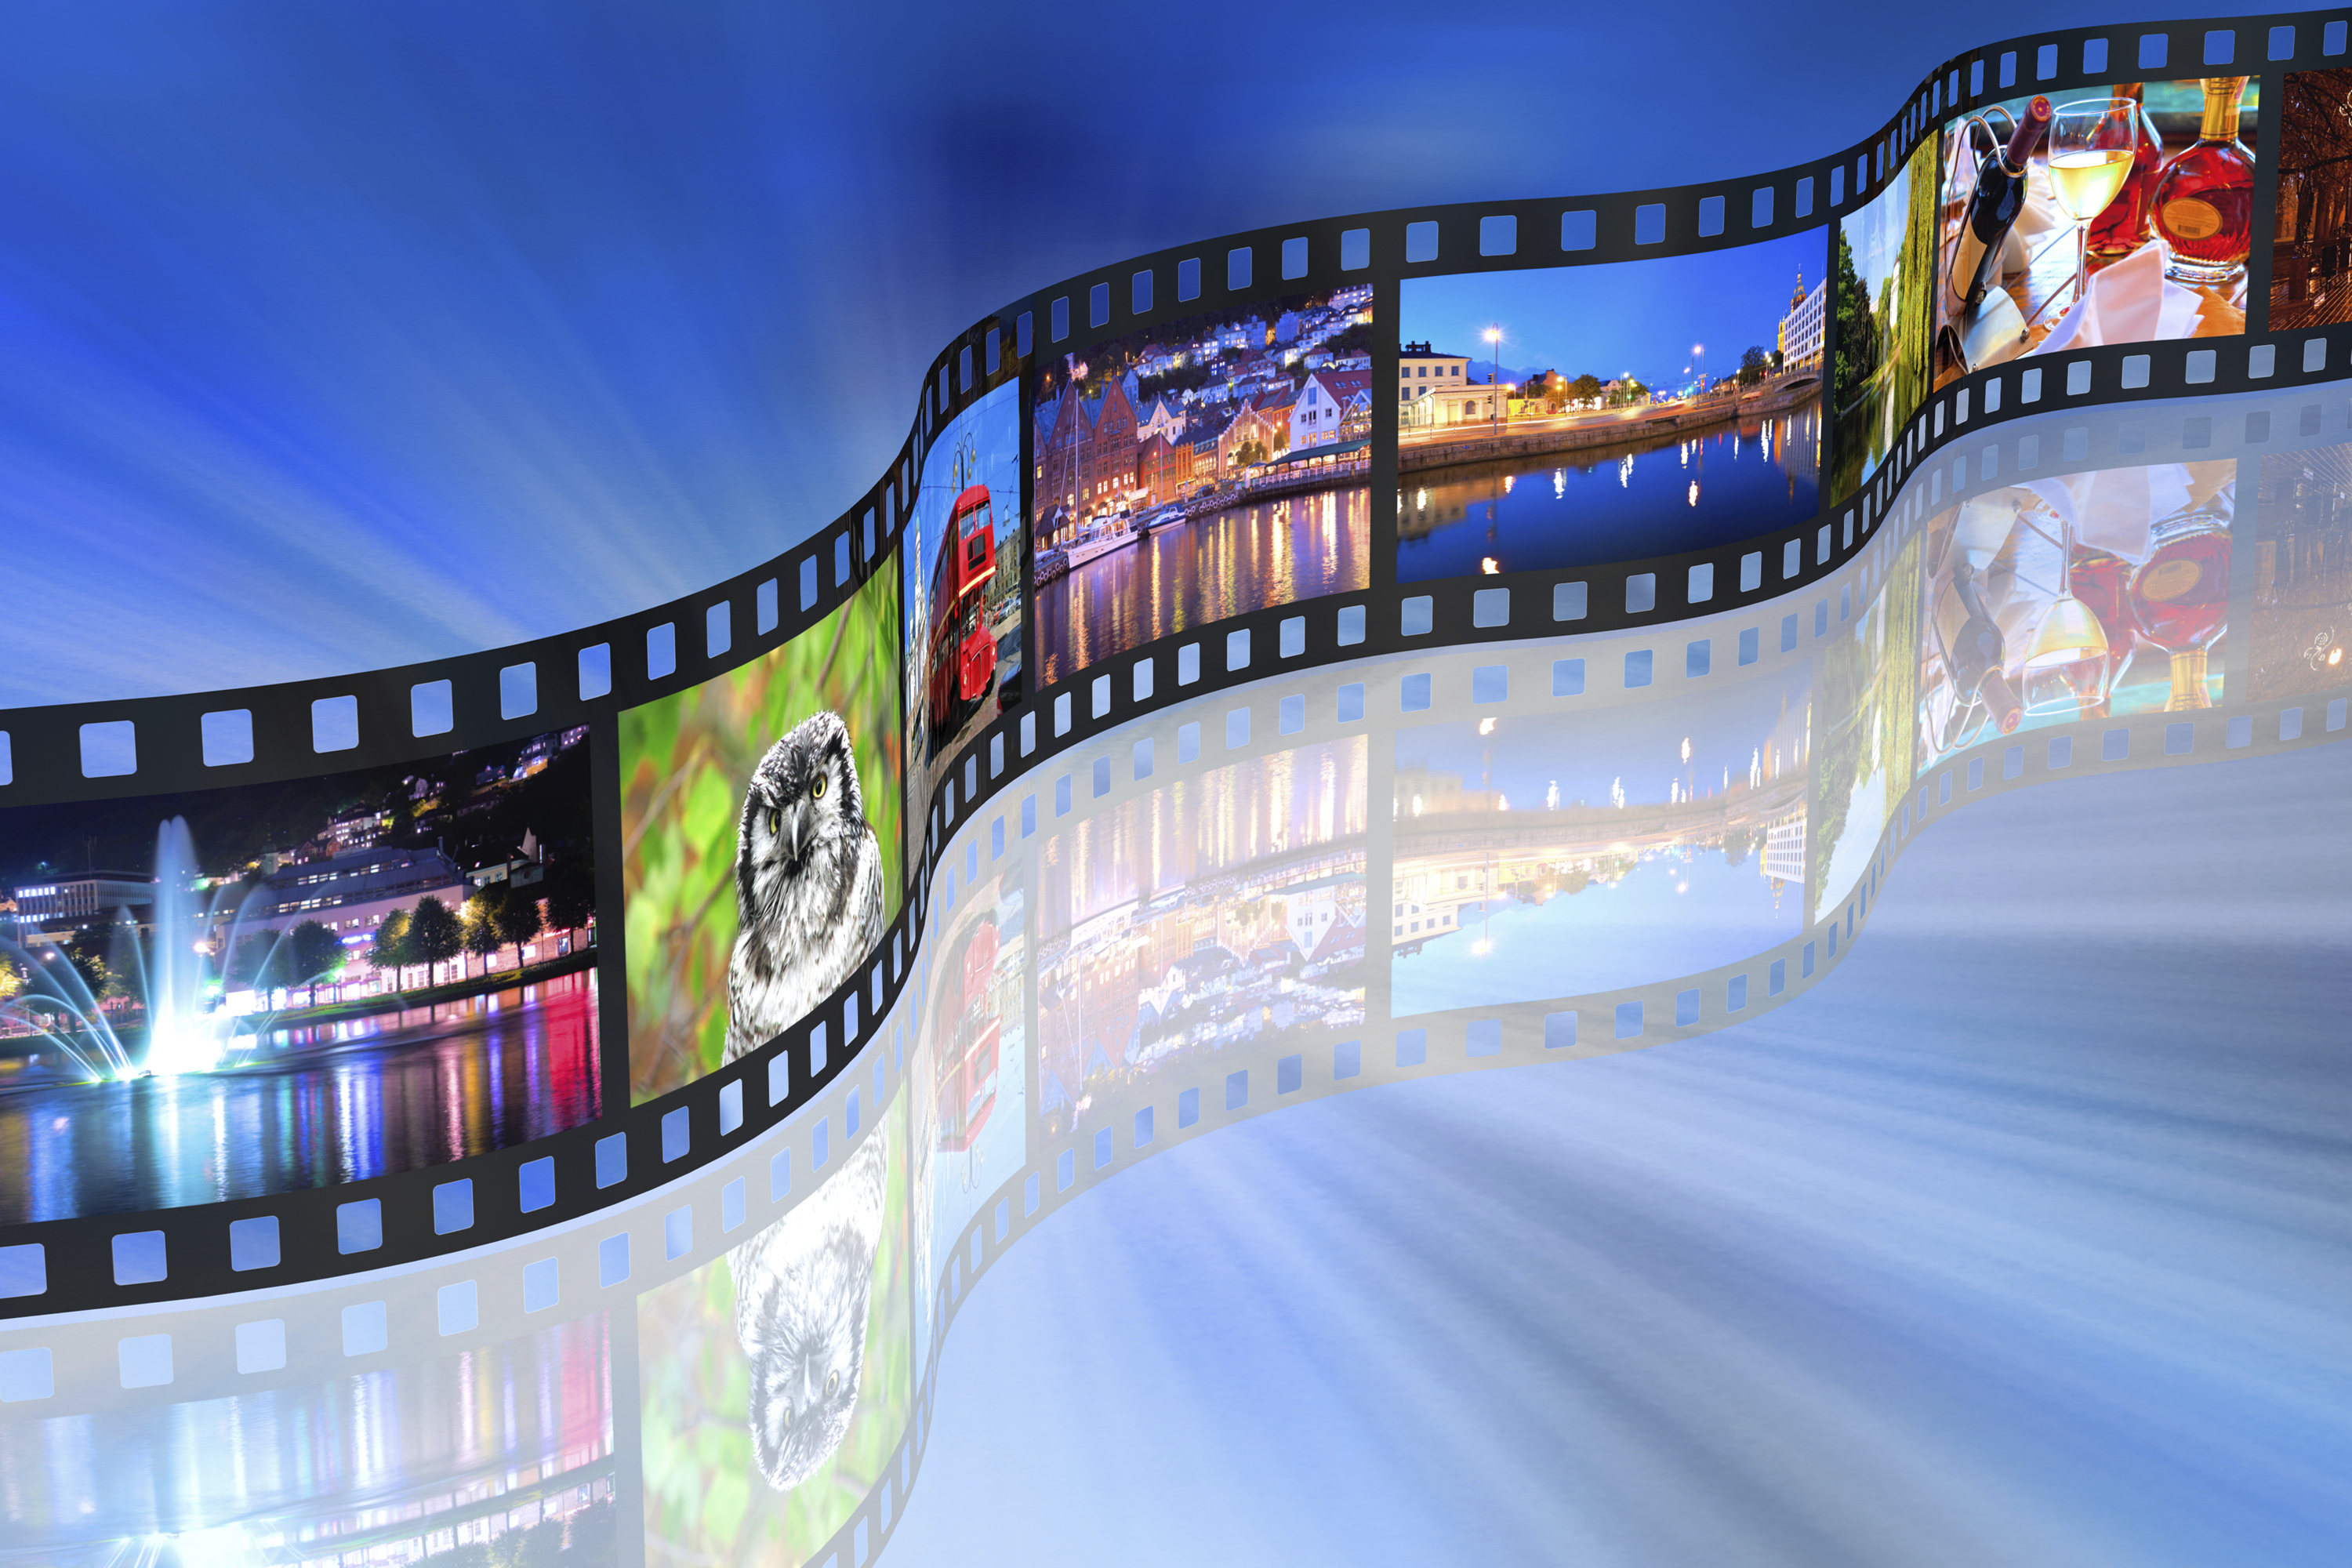 Video Streaming Database is Now Available